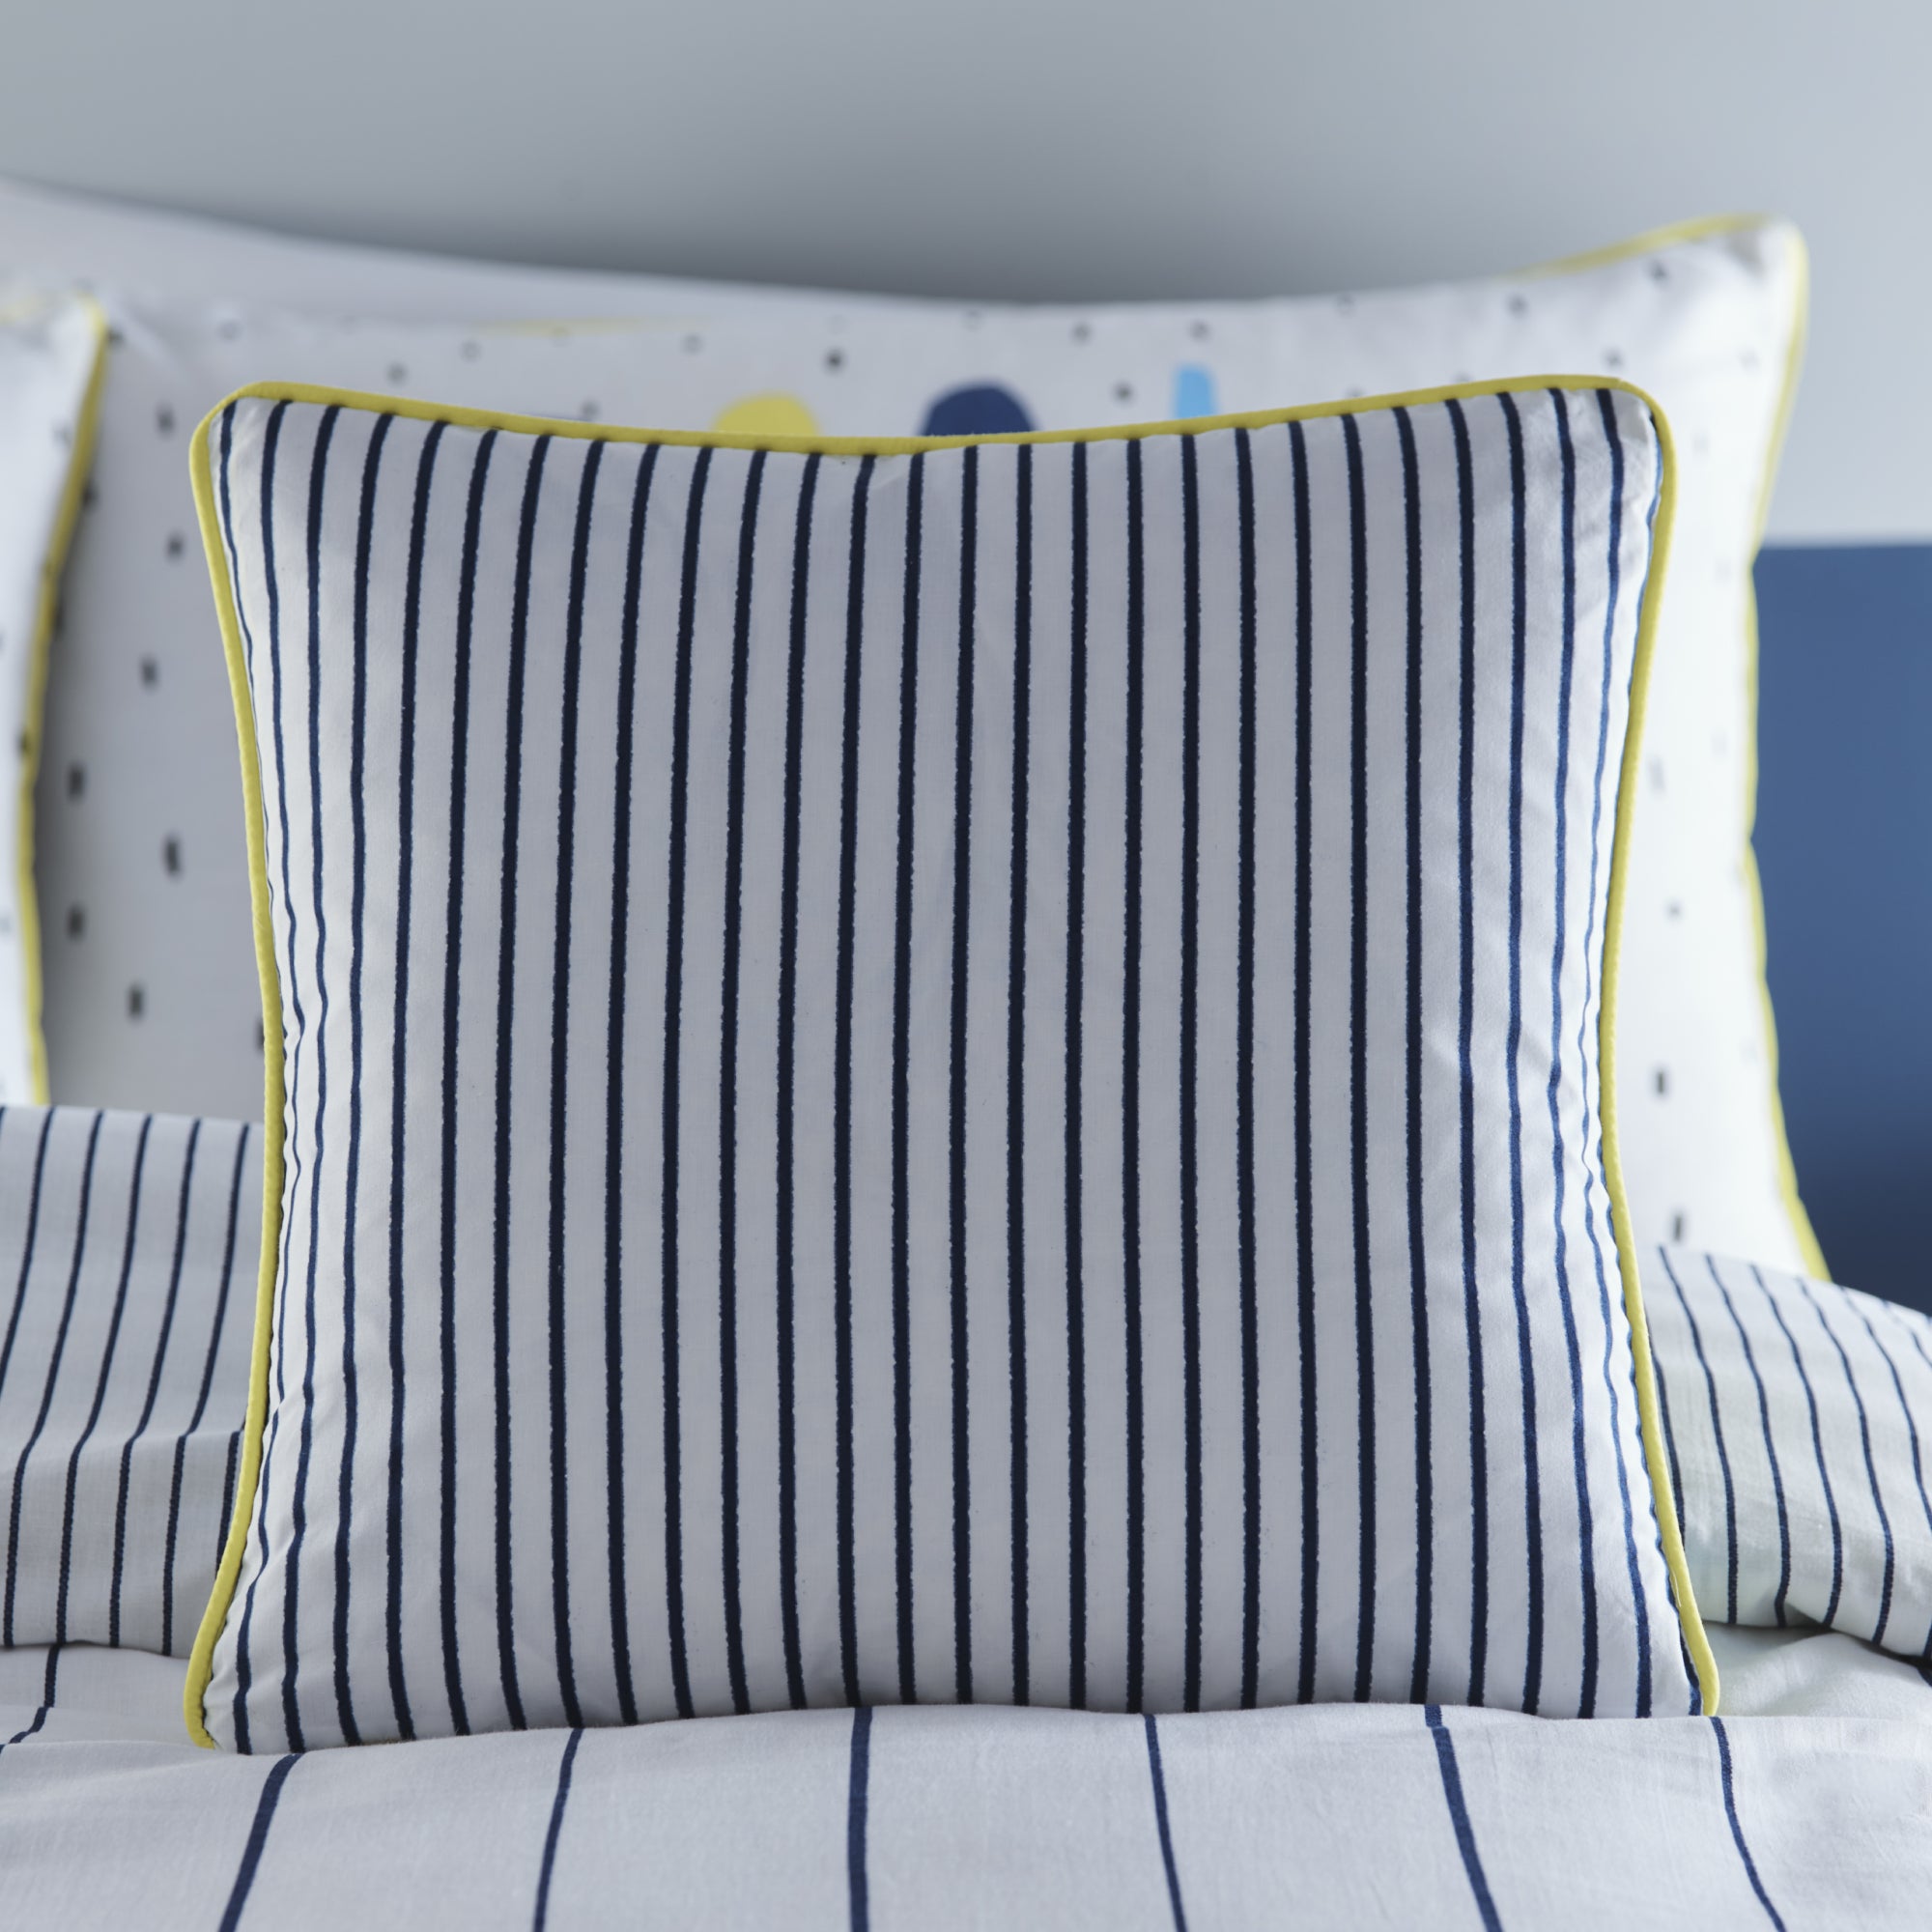 Filled Cushion Vibe by Appletree Kids in Navy